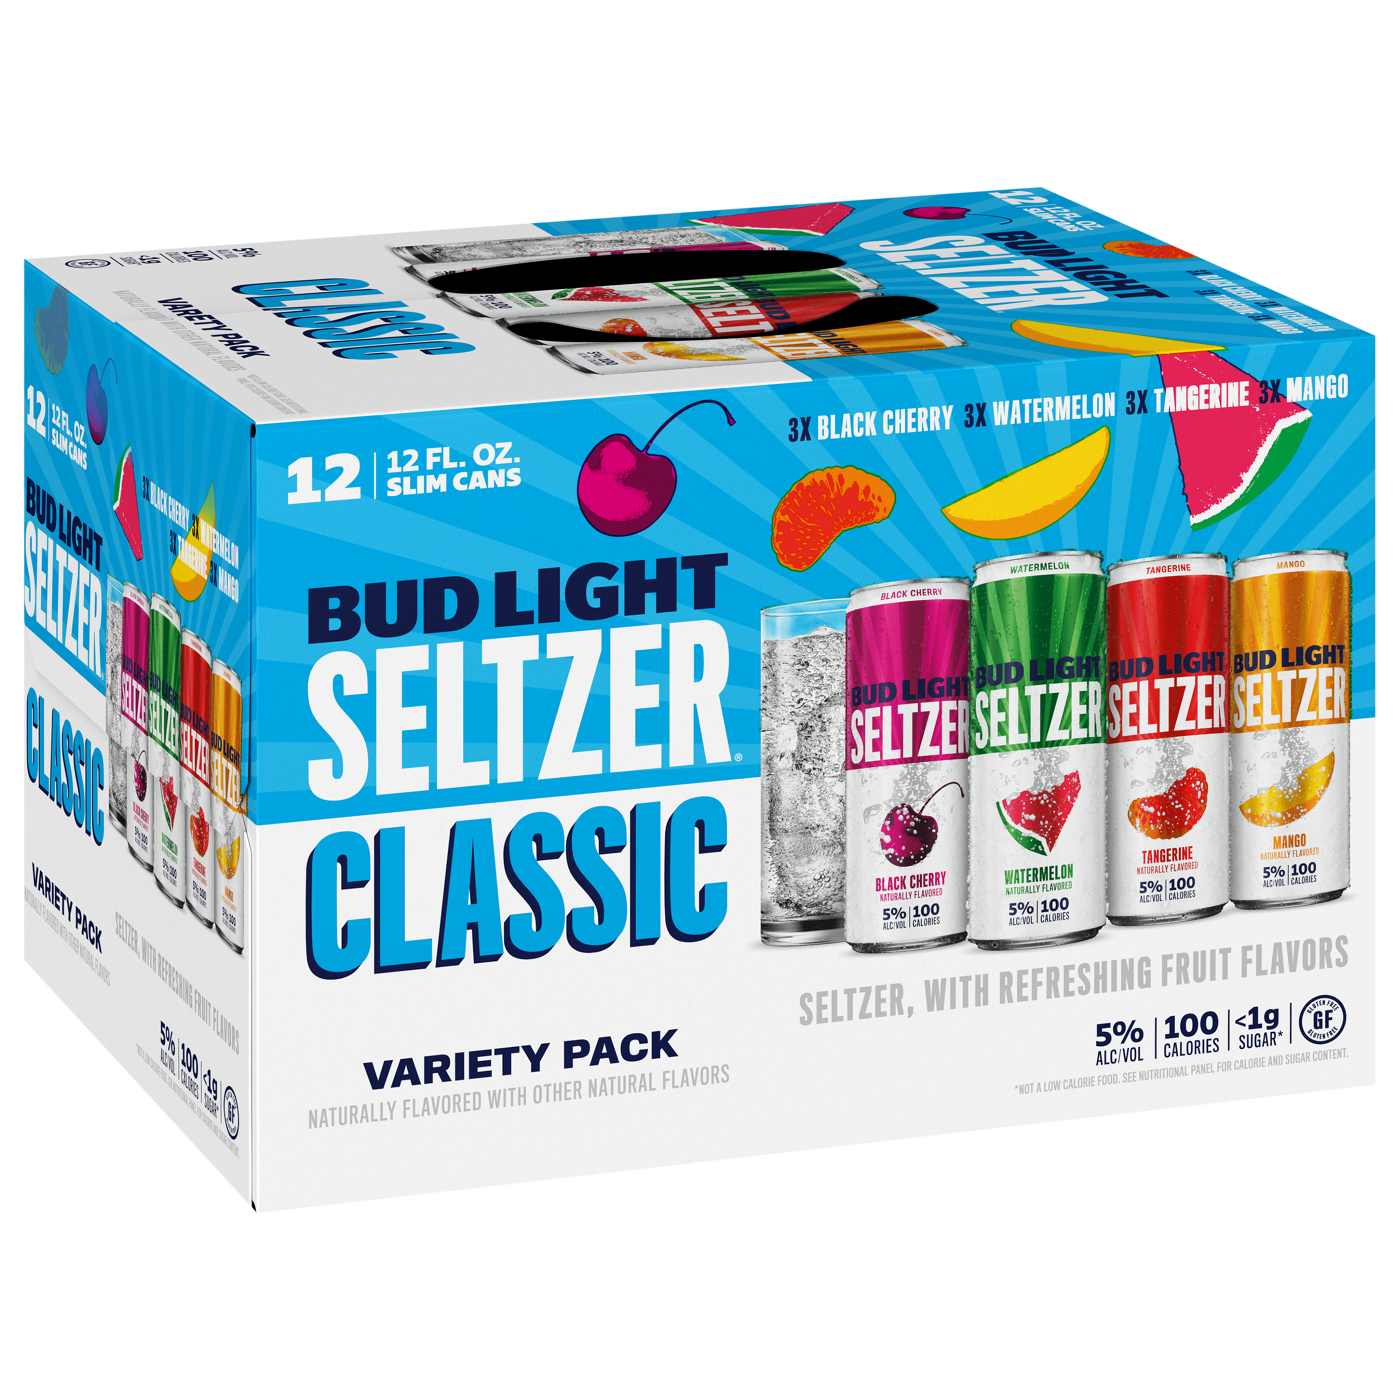 Bud Light Seltzer Classic Variety Pack 12 oz Cans; image 1 of 2